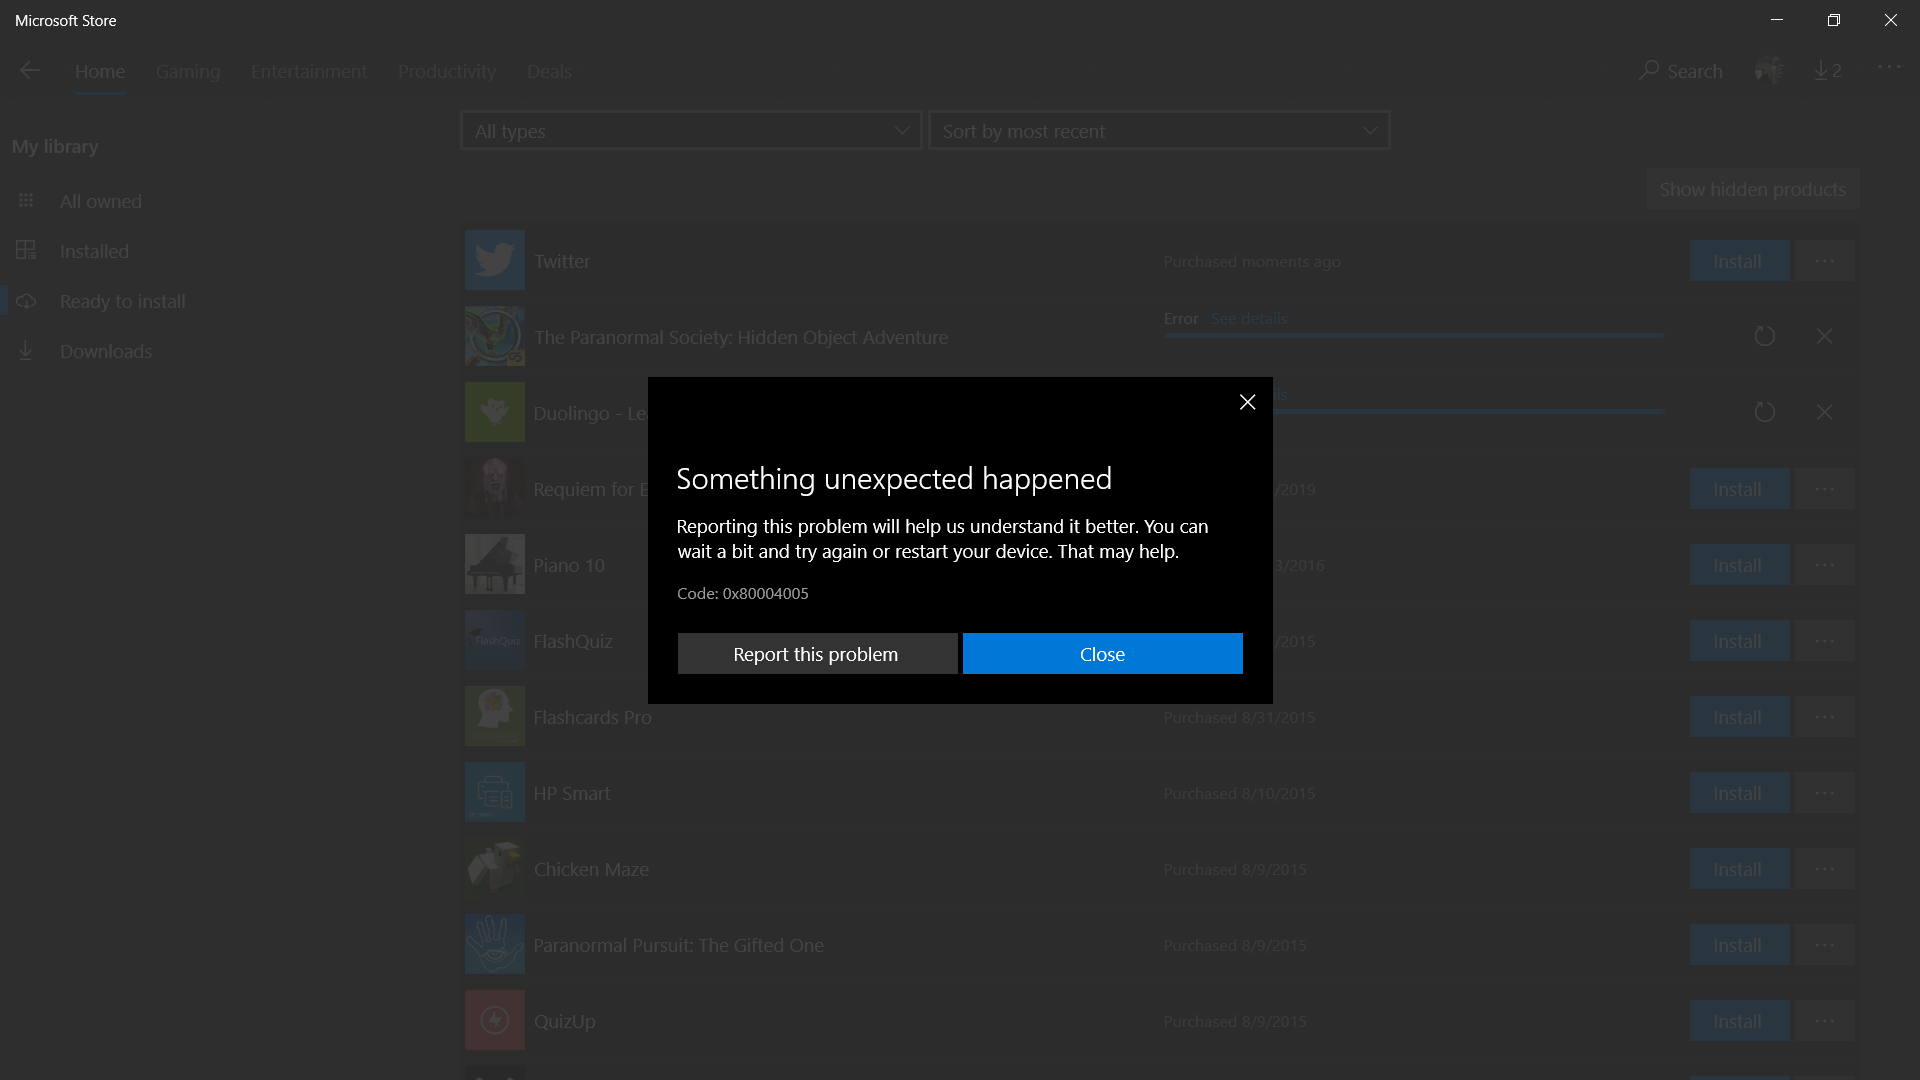 Windows Store Apps won't Install a251b0fc-65a3-4952-ad98-7e42ded4a709?upload=true.png